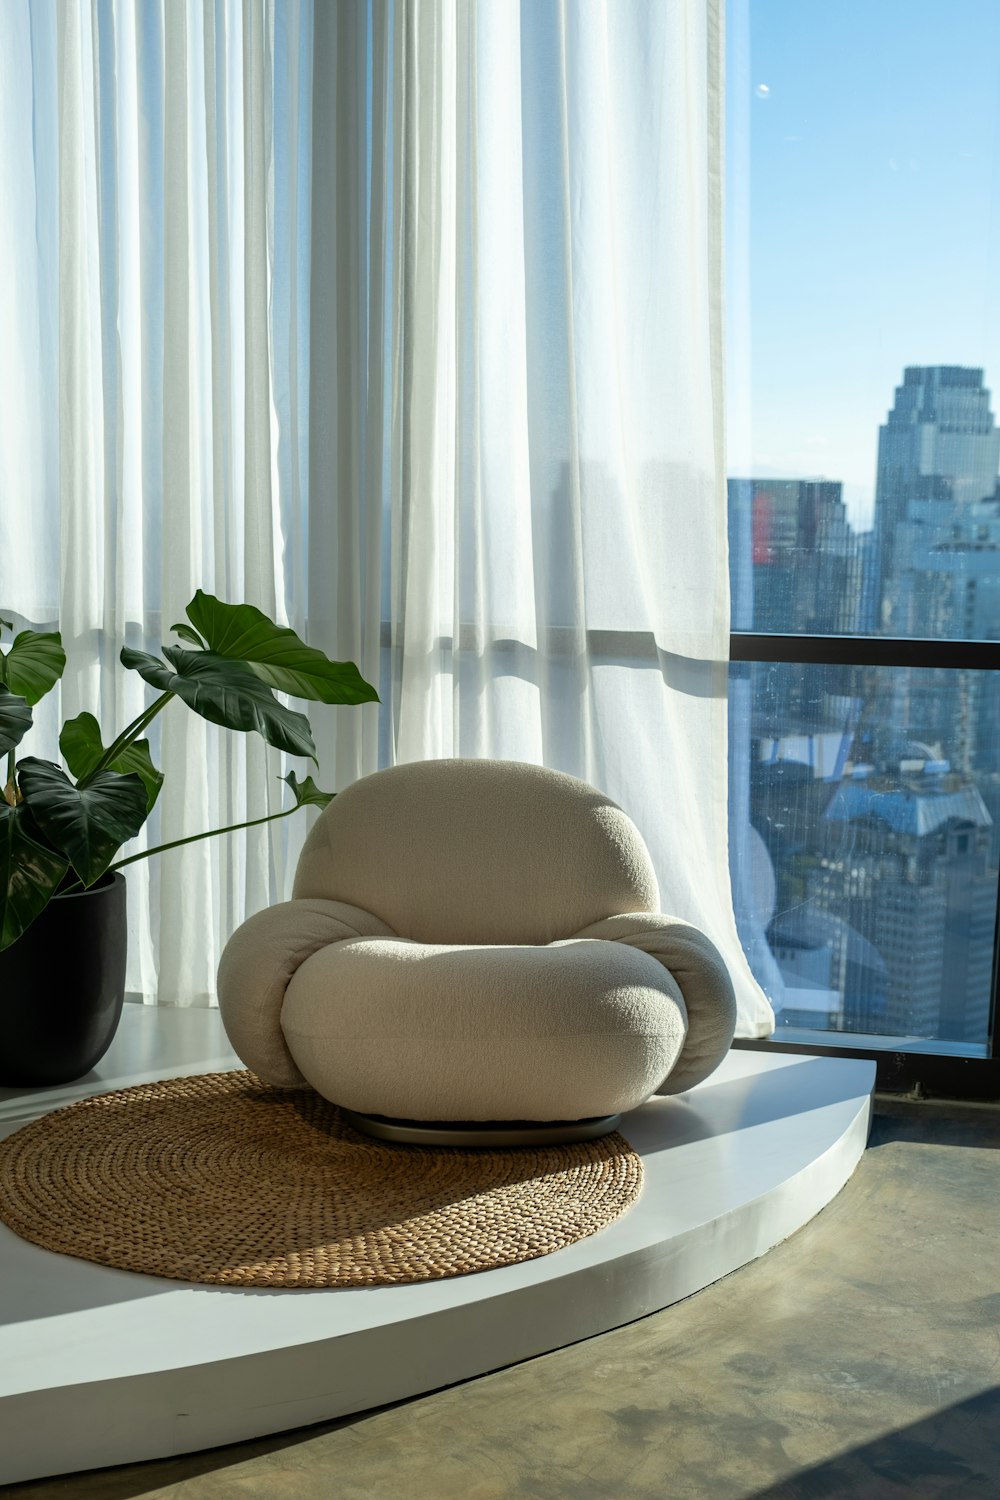 a chair and a potted plant in front of a window